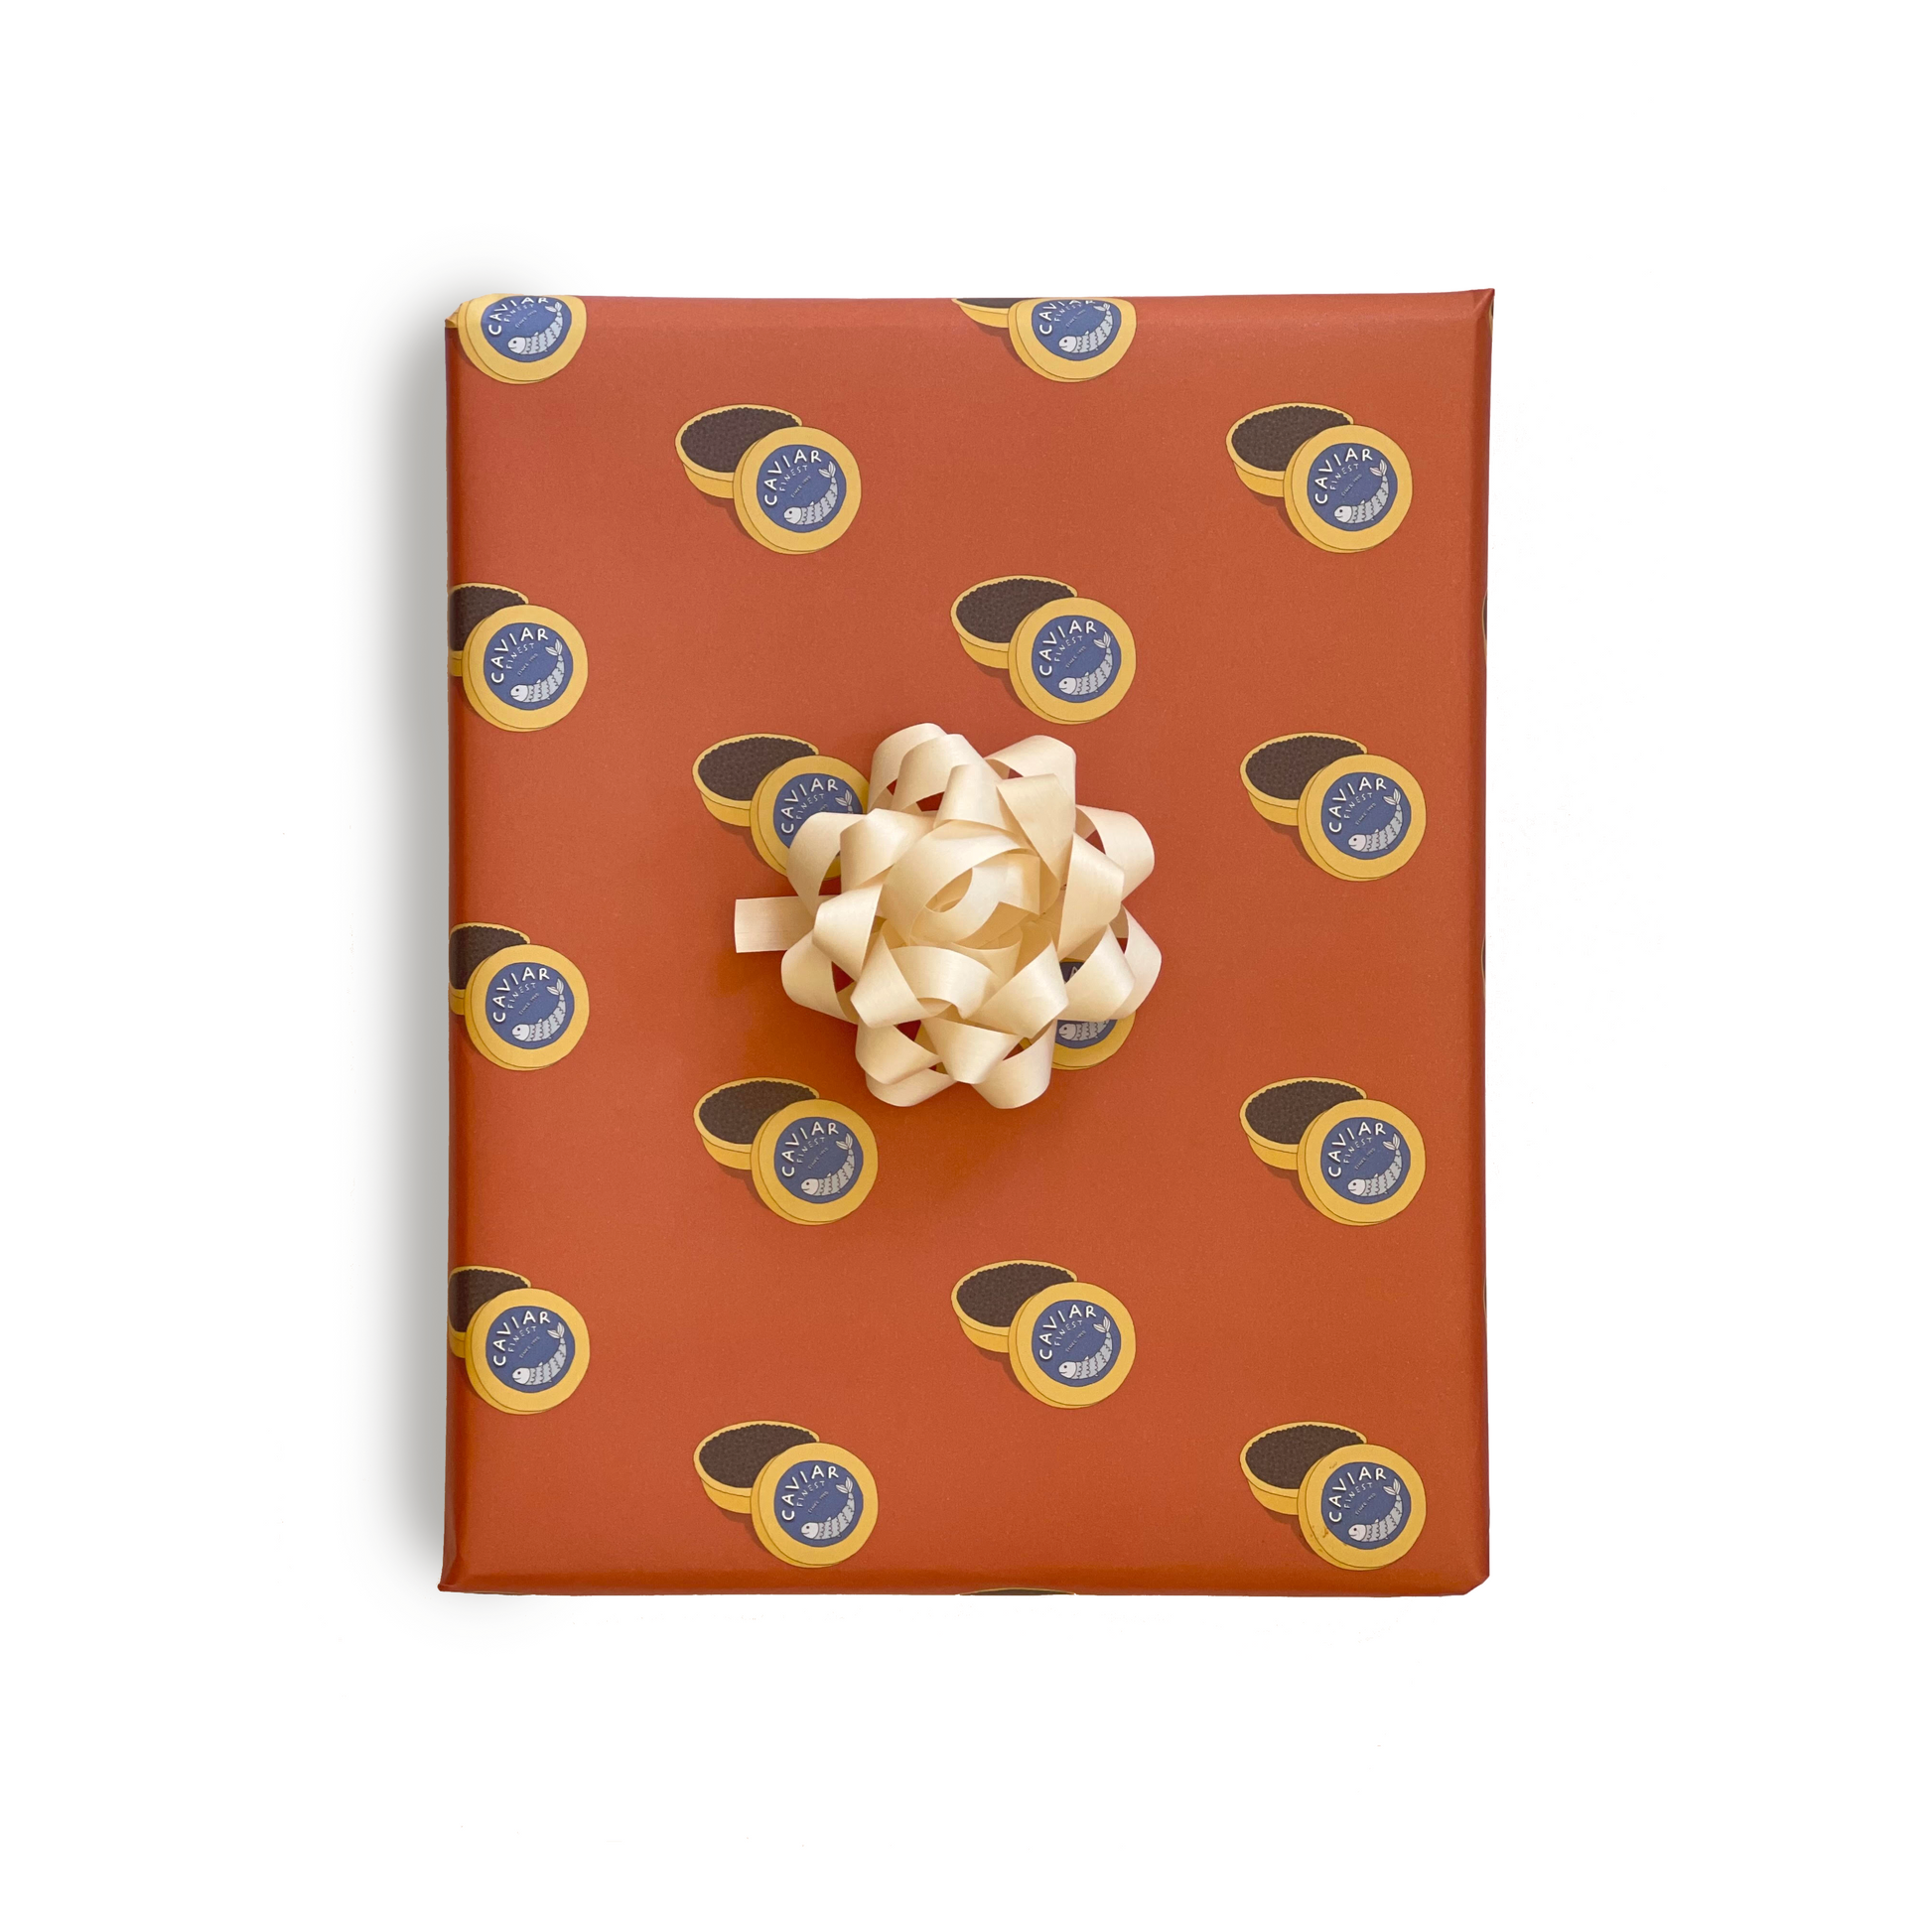 Caviar gift wrap, single sheet -- red/brown background with tins of caviar on it